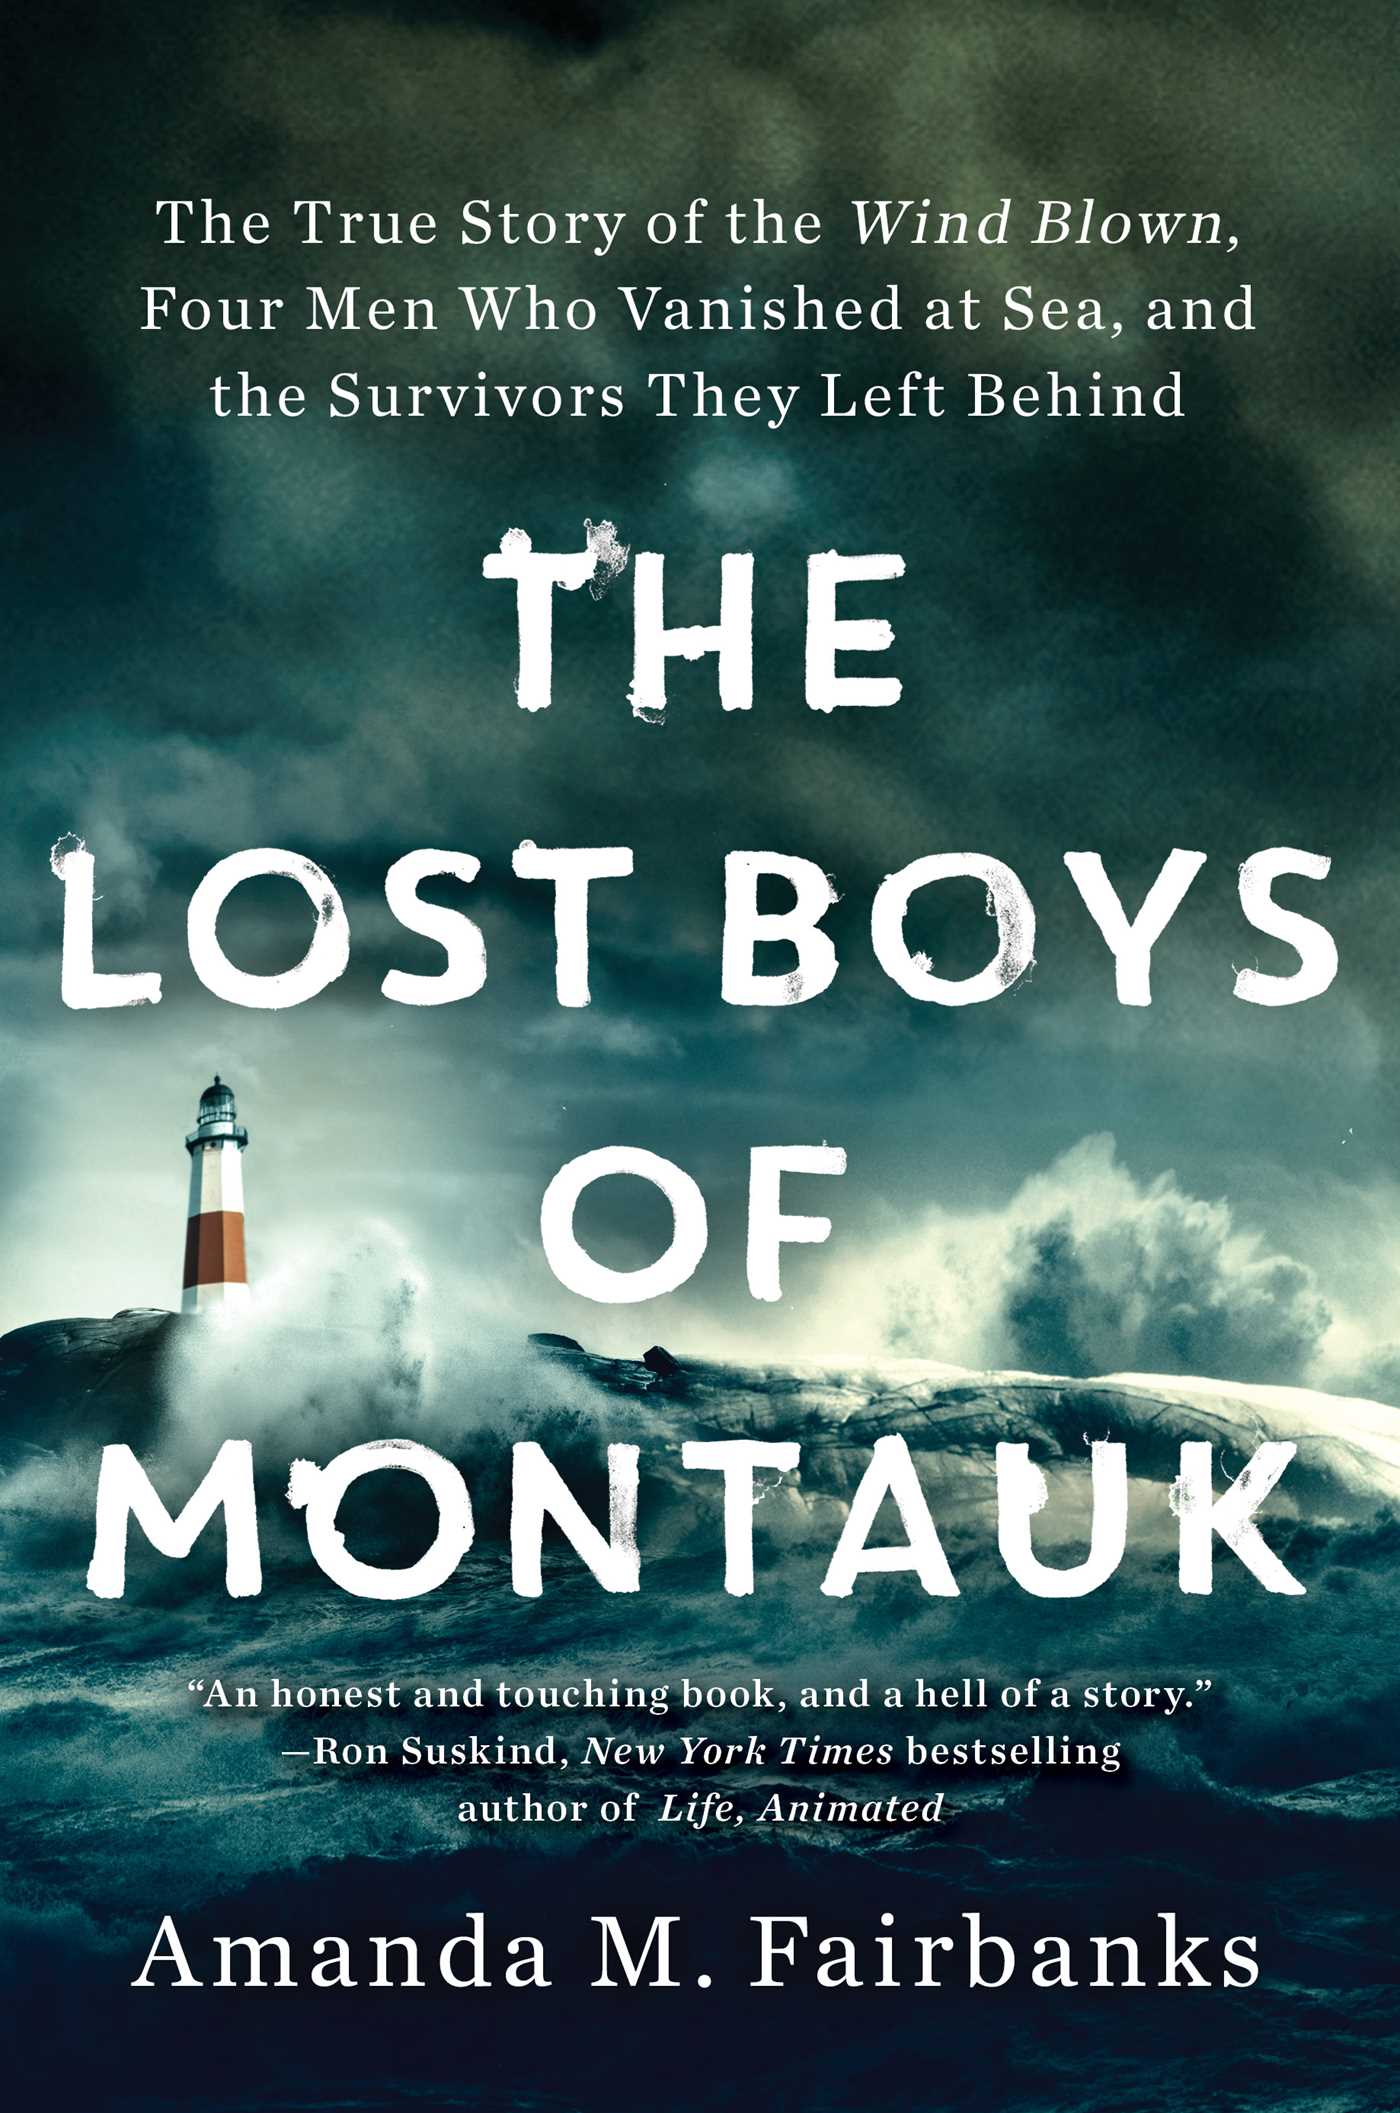 [EPUB] The Lost Boys of Montauk: The True Story of the Wind Blown, Four Men Who Vanished at Sea, and the Survivors They Left Behind by Amanda M. Fairbanks